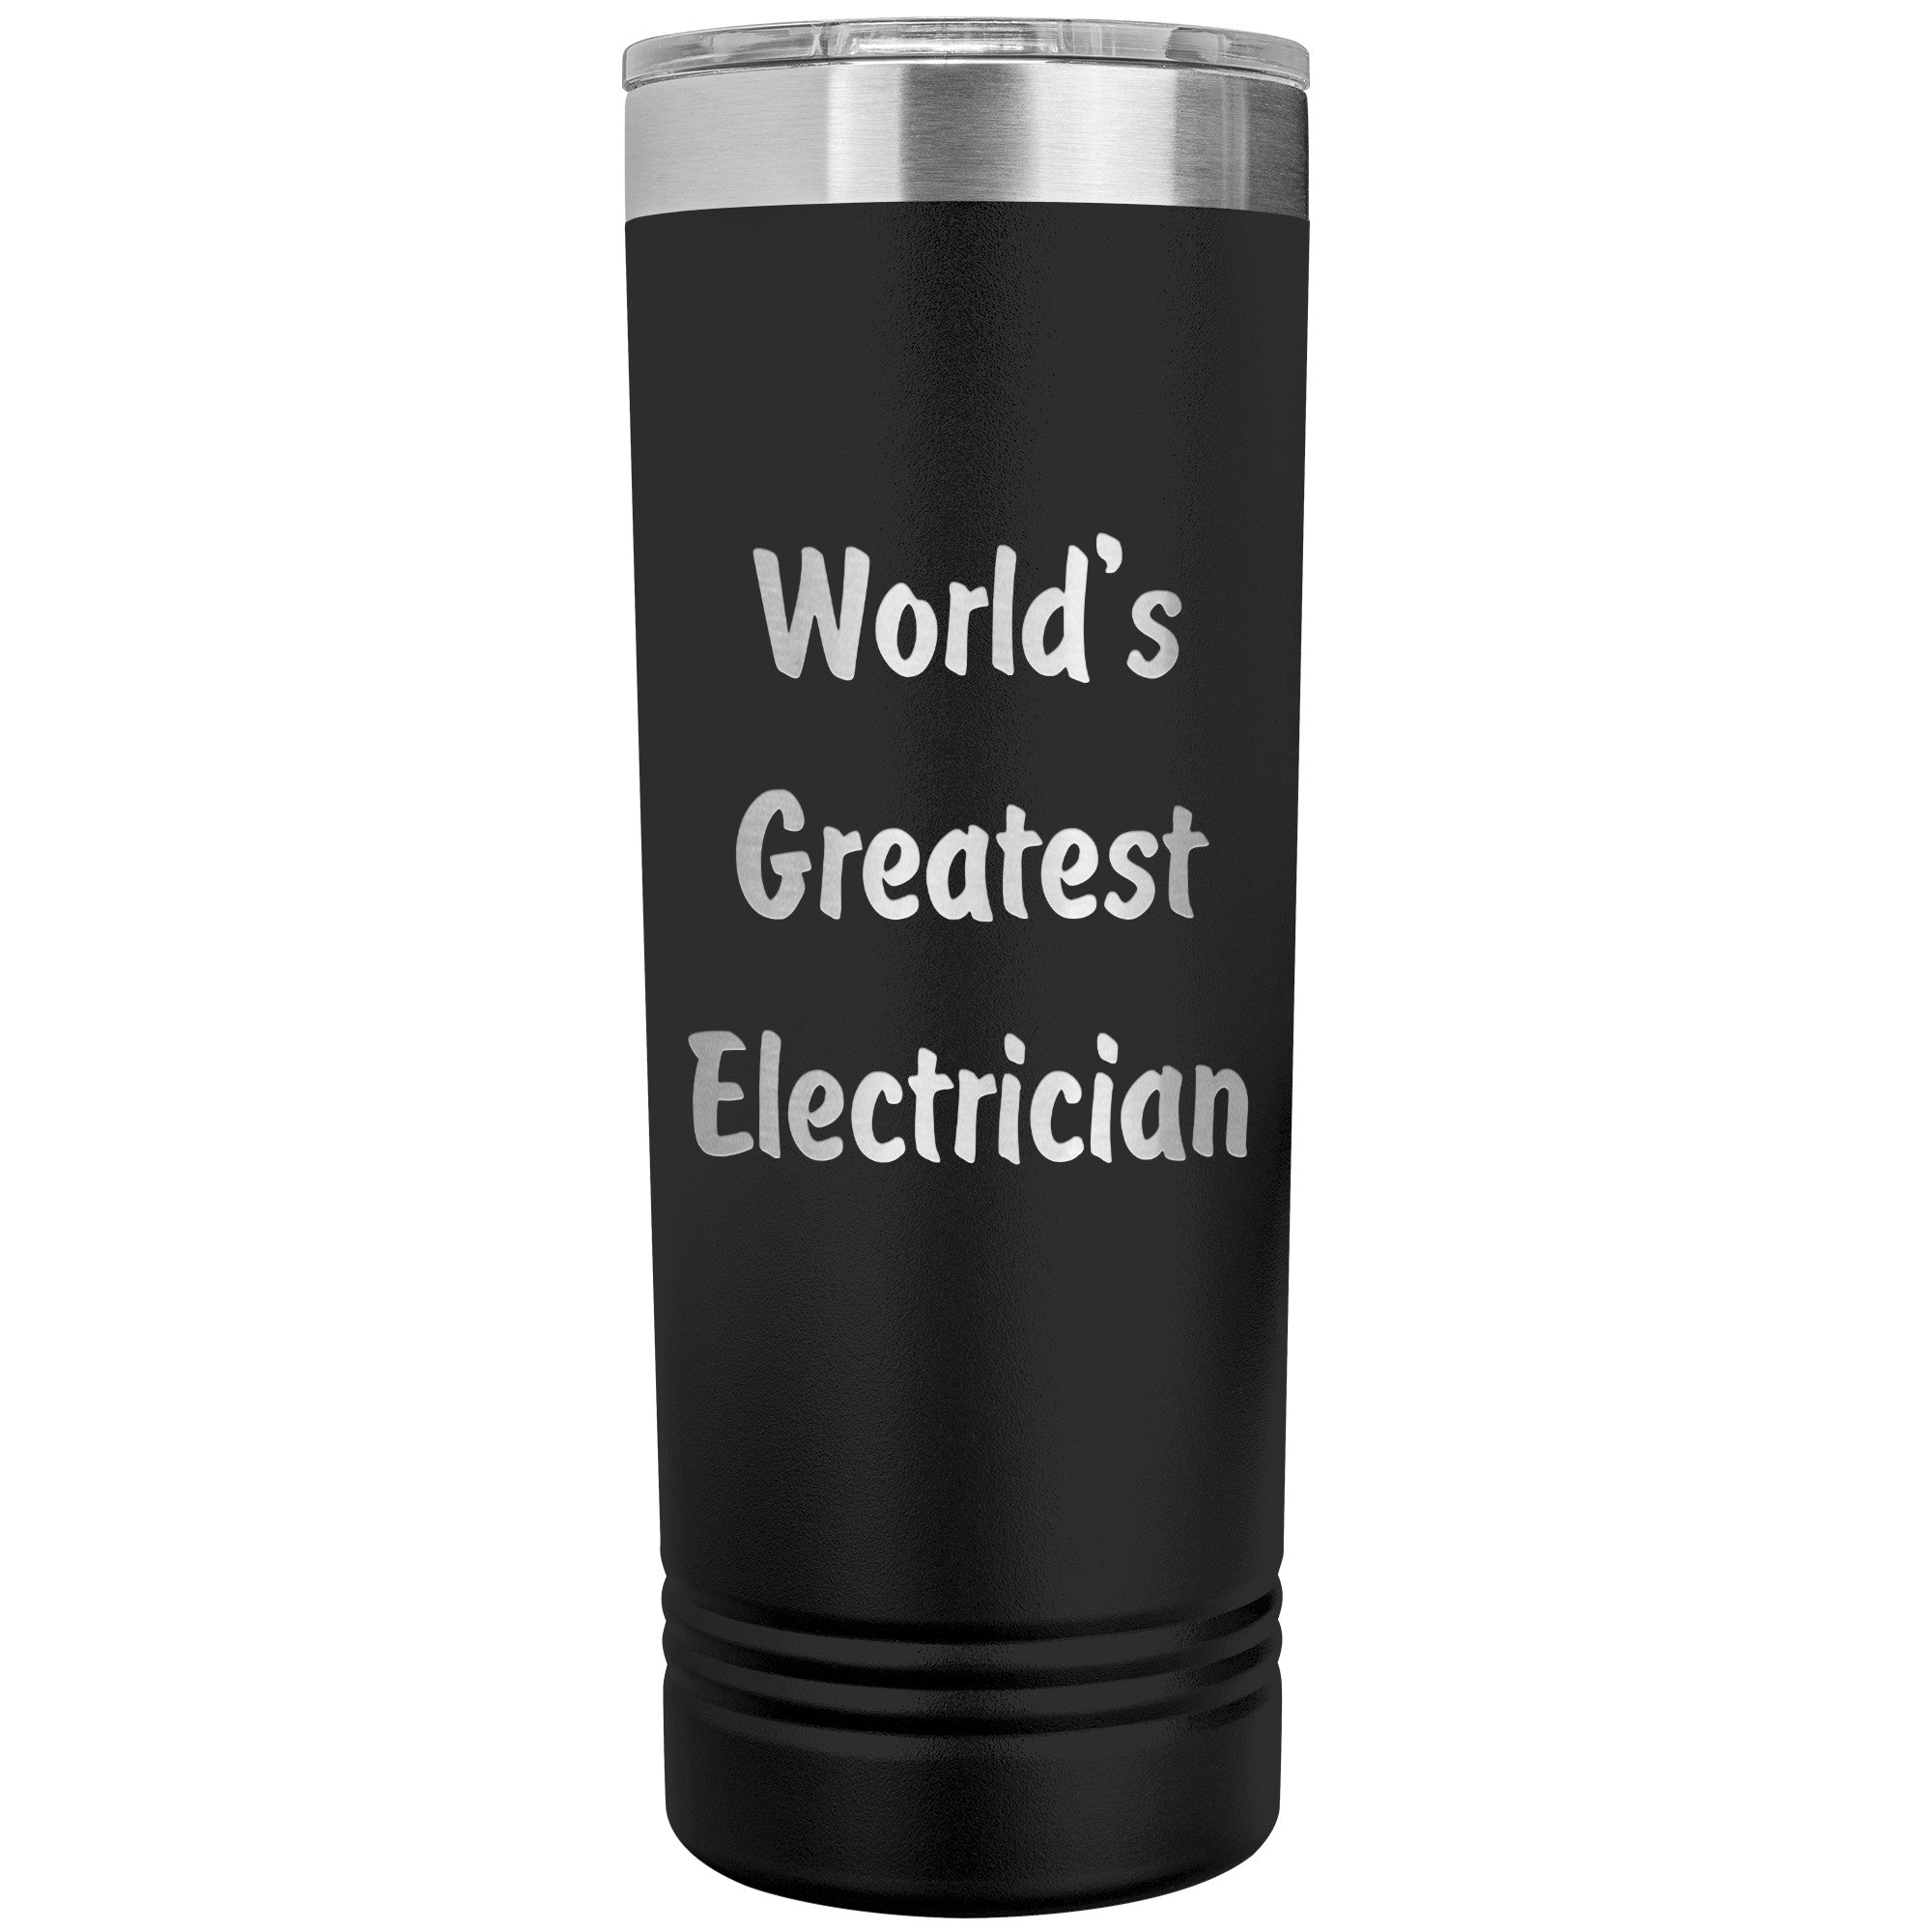 World's Greatest Electrician - 22oz Insulated Skinny Tumbler